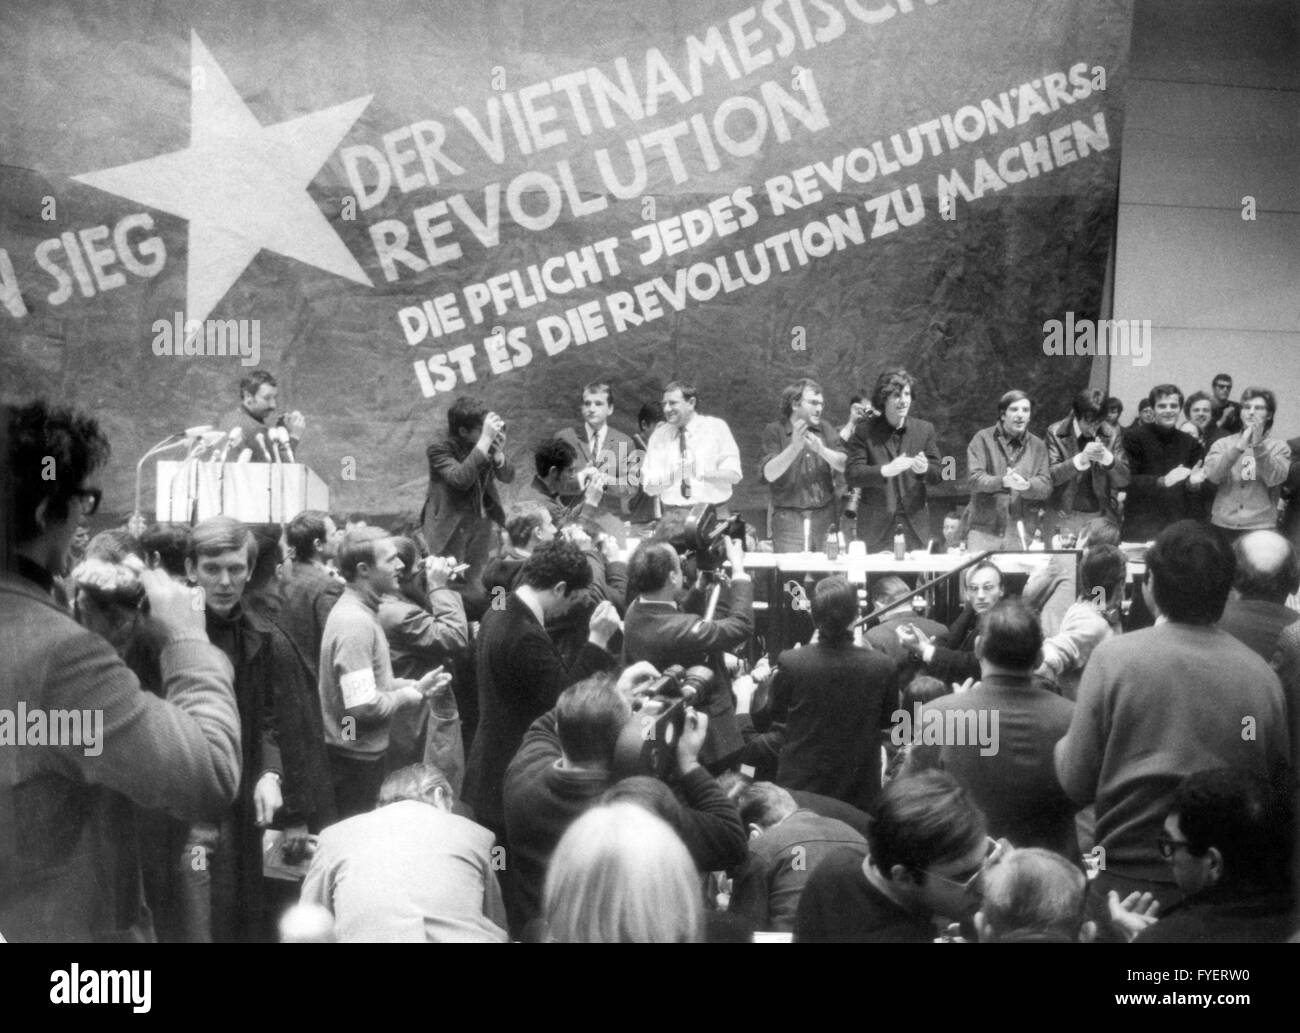 About 3000 persons, mostly students, took part in the International Vietnam conference, carried out by the Socialist German Student Union (SDS), at the Technical University in Berlin on 17th February 1968. Following persons standing at the table in front of the outsized Vietcong flag: (l-r) K.D Wolff (at the speaker's desk), Dr Klaus Meschkat, Dr Johannes Agnoli, Christian Semmler, Gaston Salvatore, Rudi Dutschke, Günther Ament, Kurt Steinhaus and Tariq Ali. Stock Photo